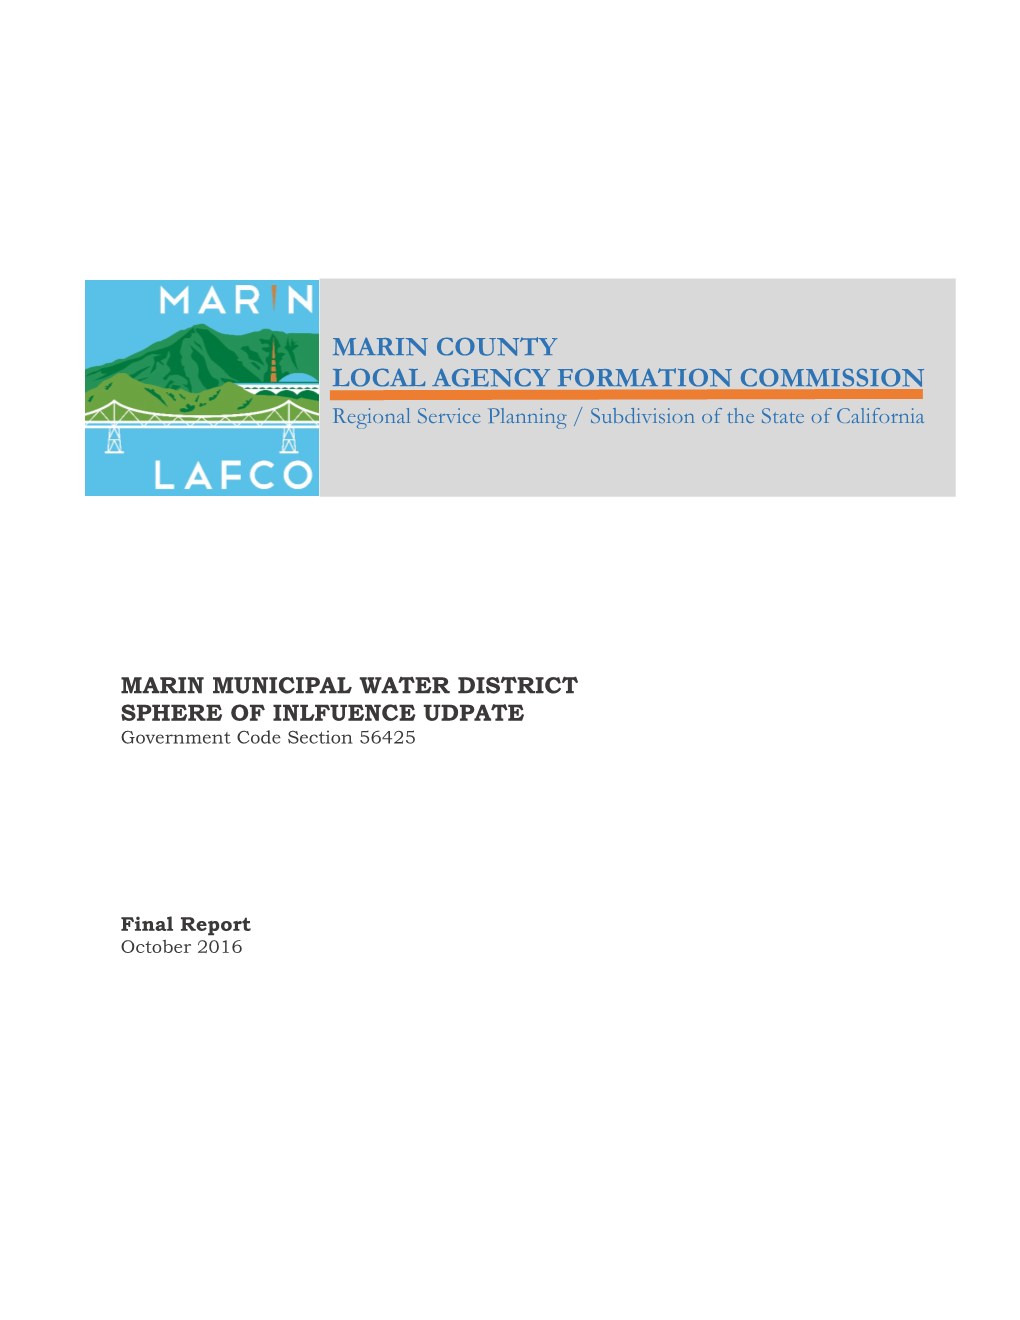 MARIN COUNTY LOCAL AGENCY FORMATION COMMISSION Regional Service Planning / Subdivision of the State of California